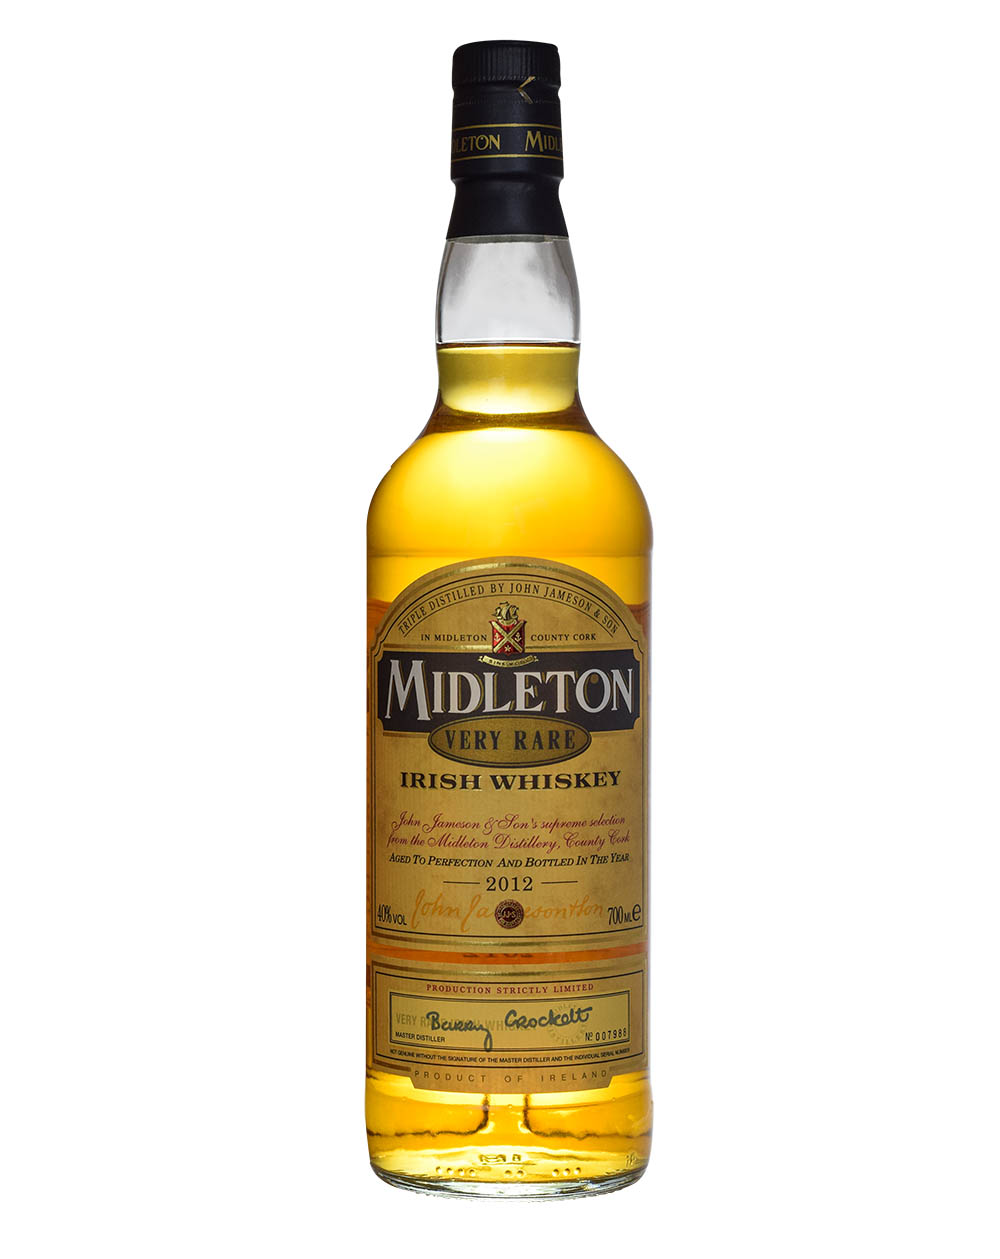 Midleton Very Rare 2012 Old Musthave Malts MHM